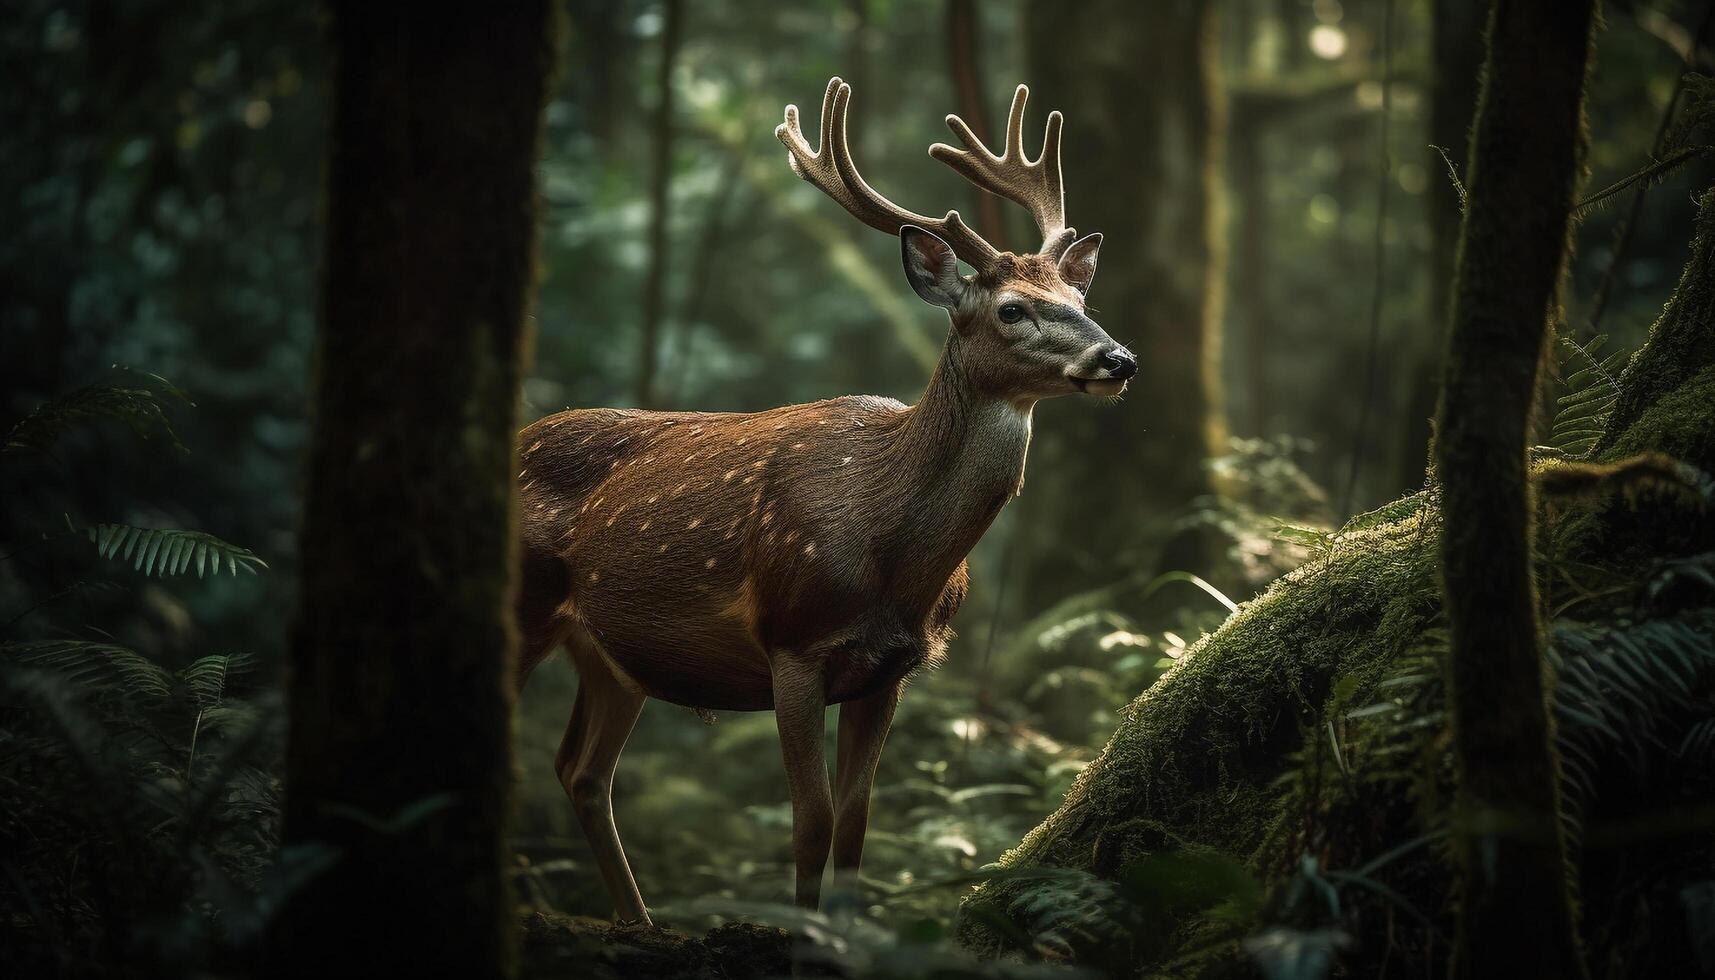 Horned stag standing in tranquil forest landscape generated by AI photo